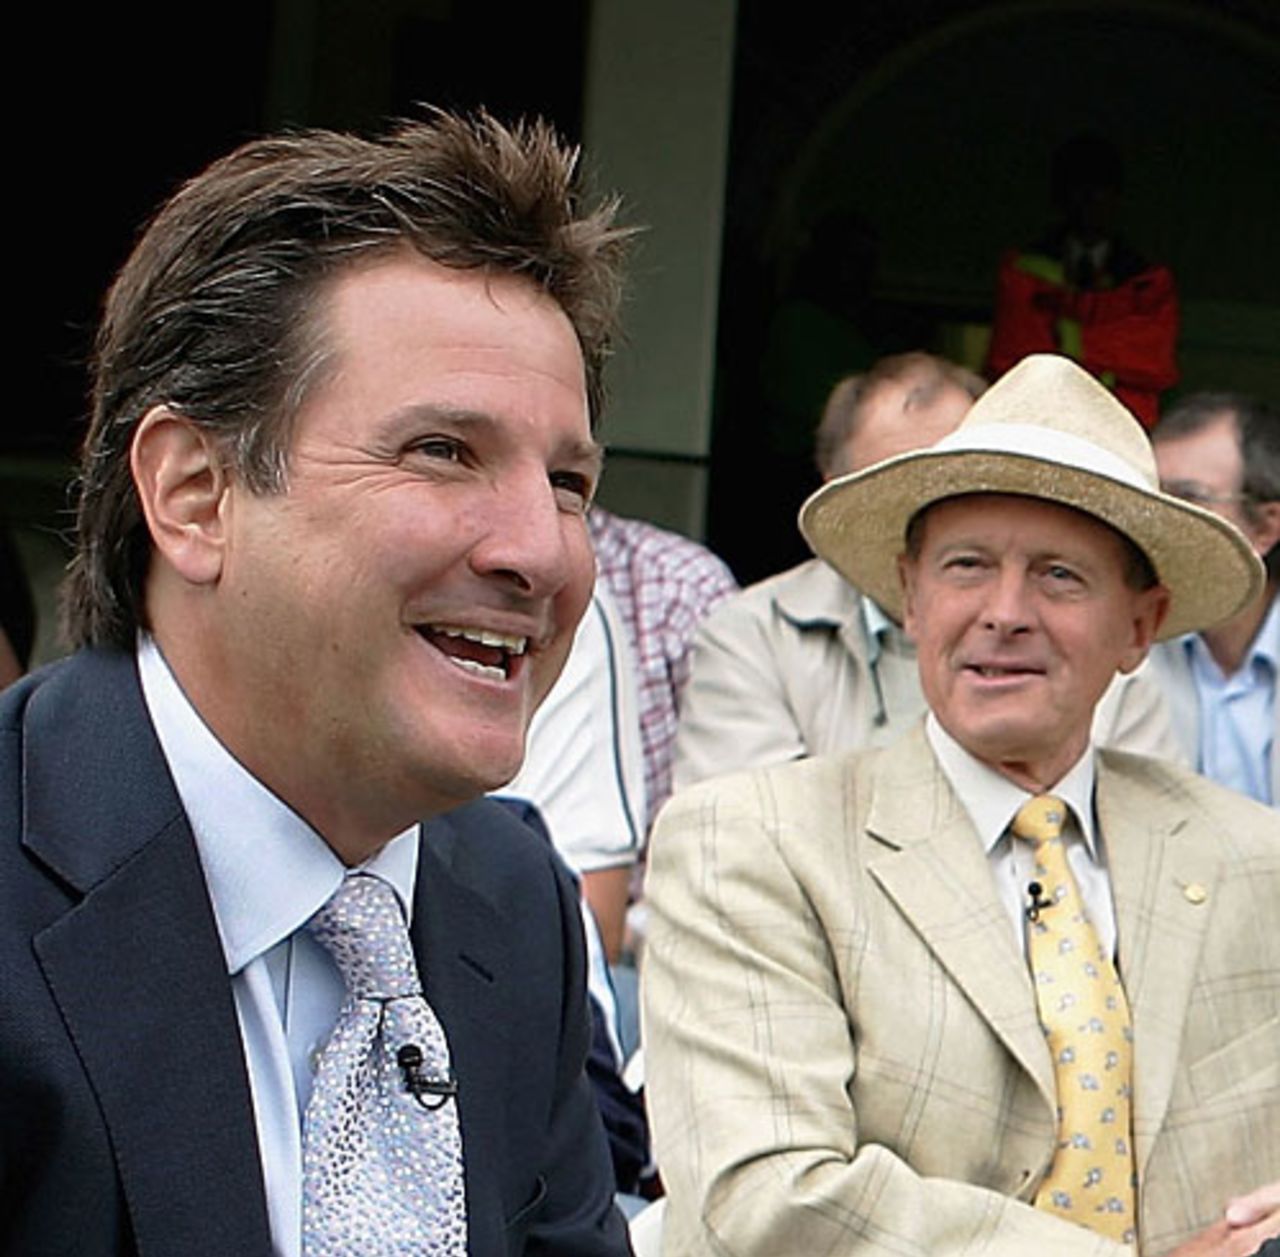 Mark Nicholas and Geoff Boycott at The Oval September 12, 2005